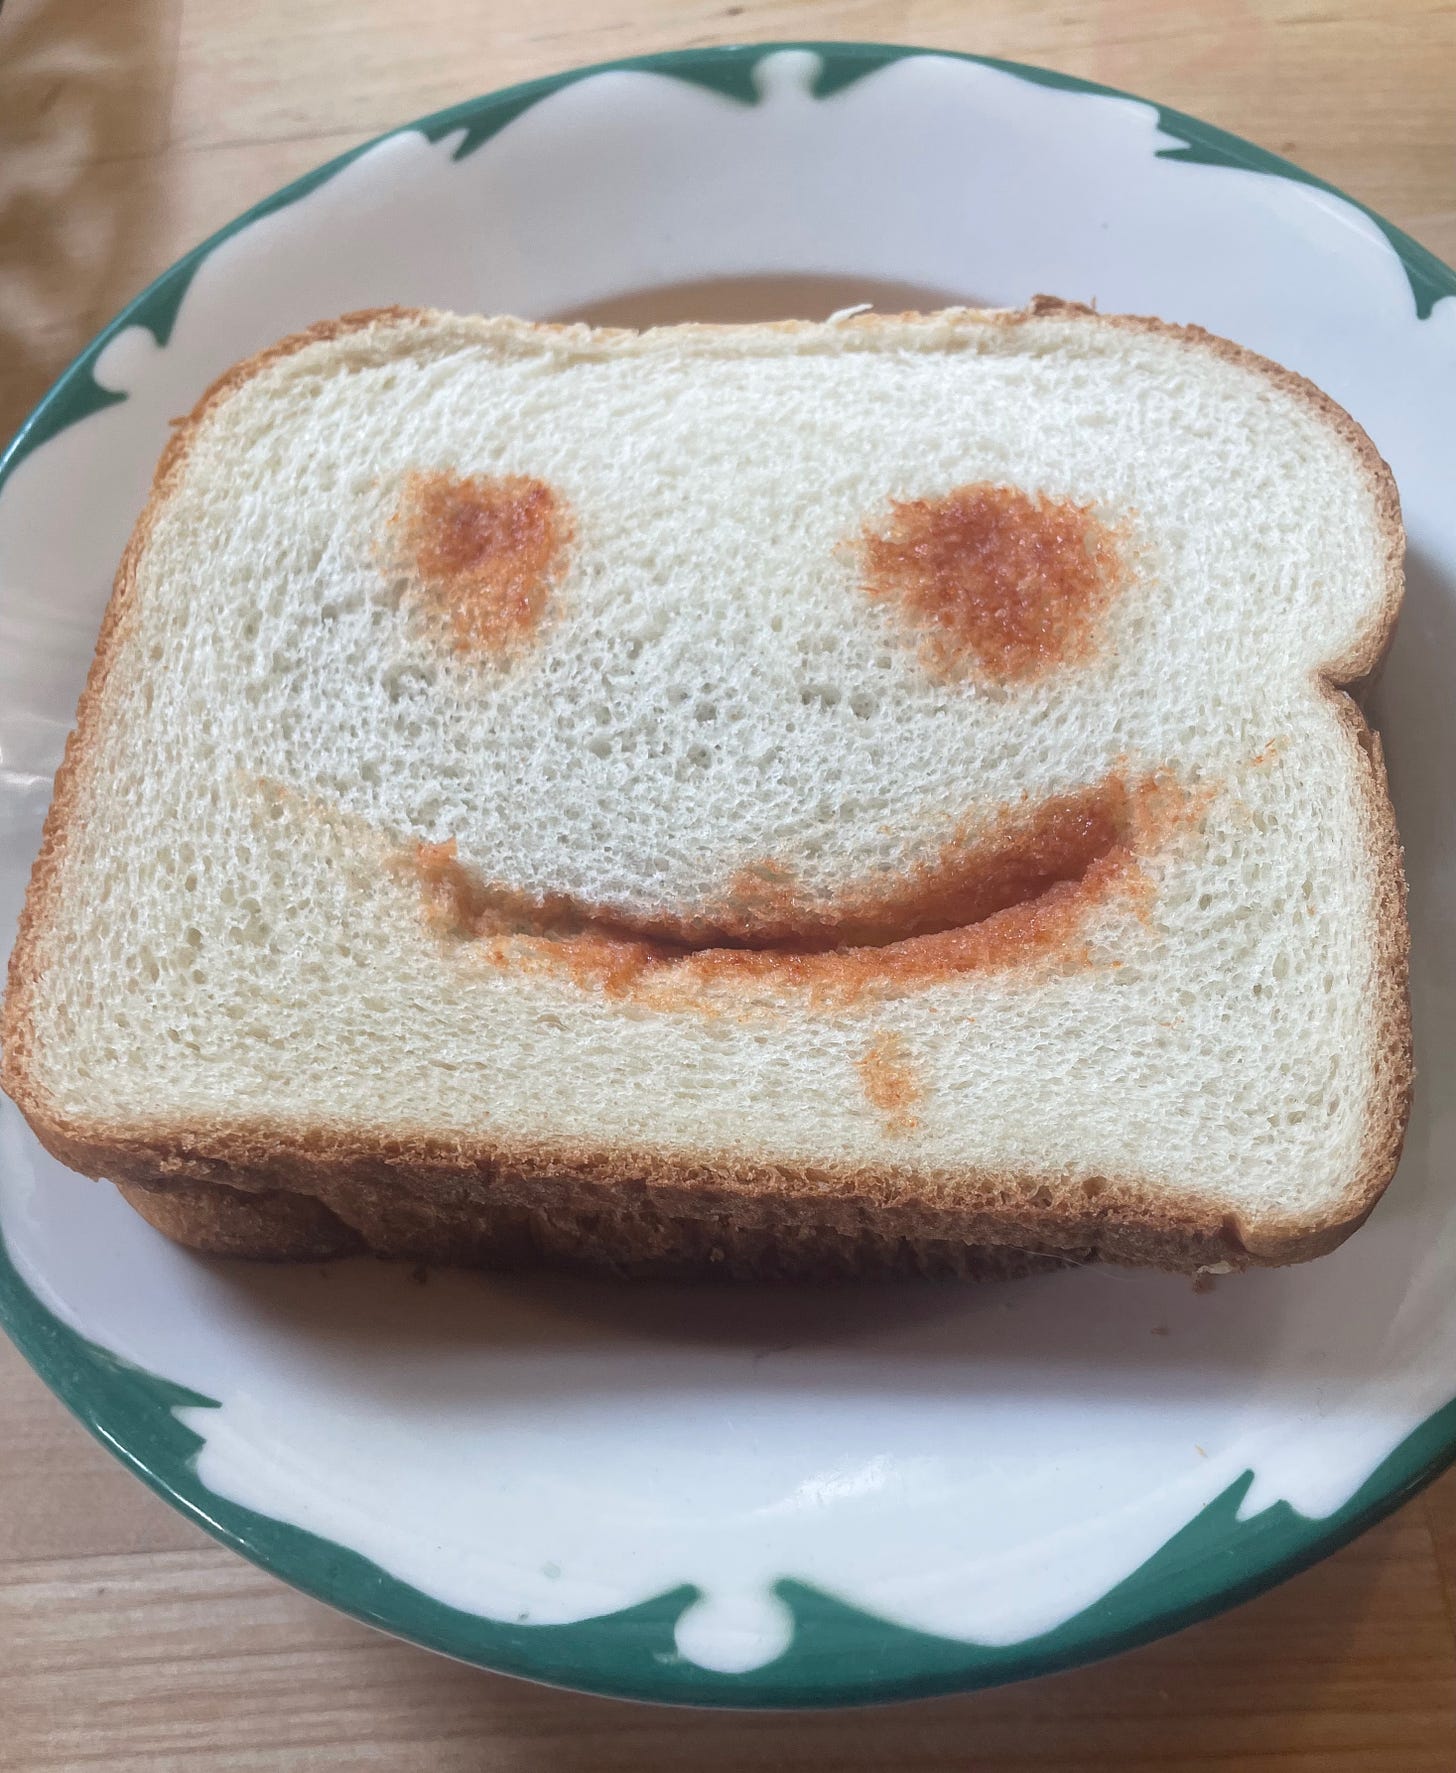 photo of a sandwhich with a smiley face made of ketchup